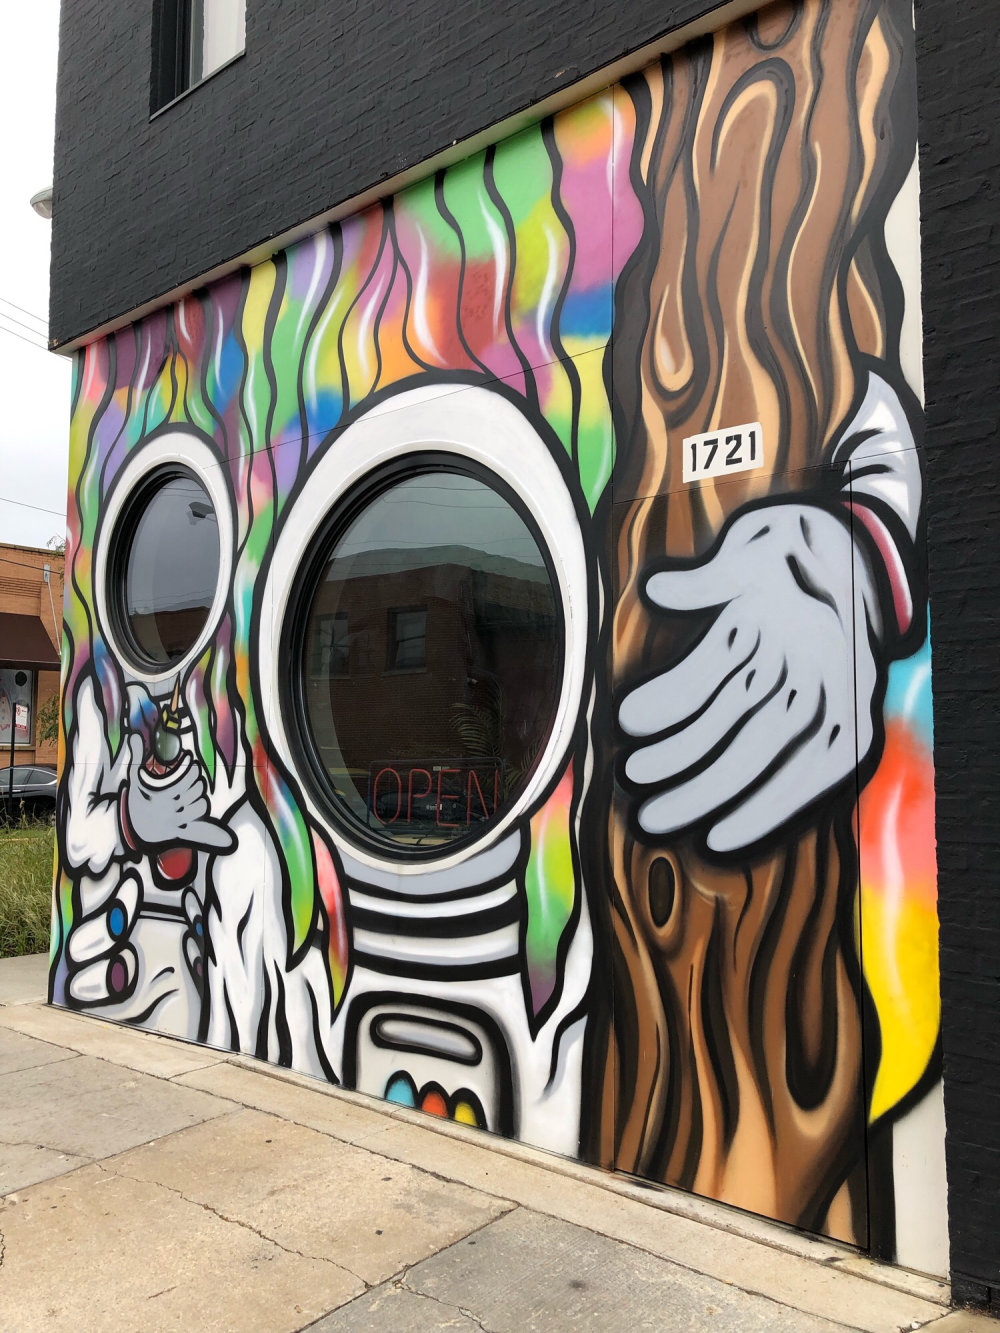 mural in Chicago by artist Afrokilla.